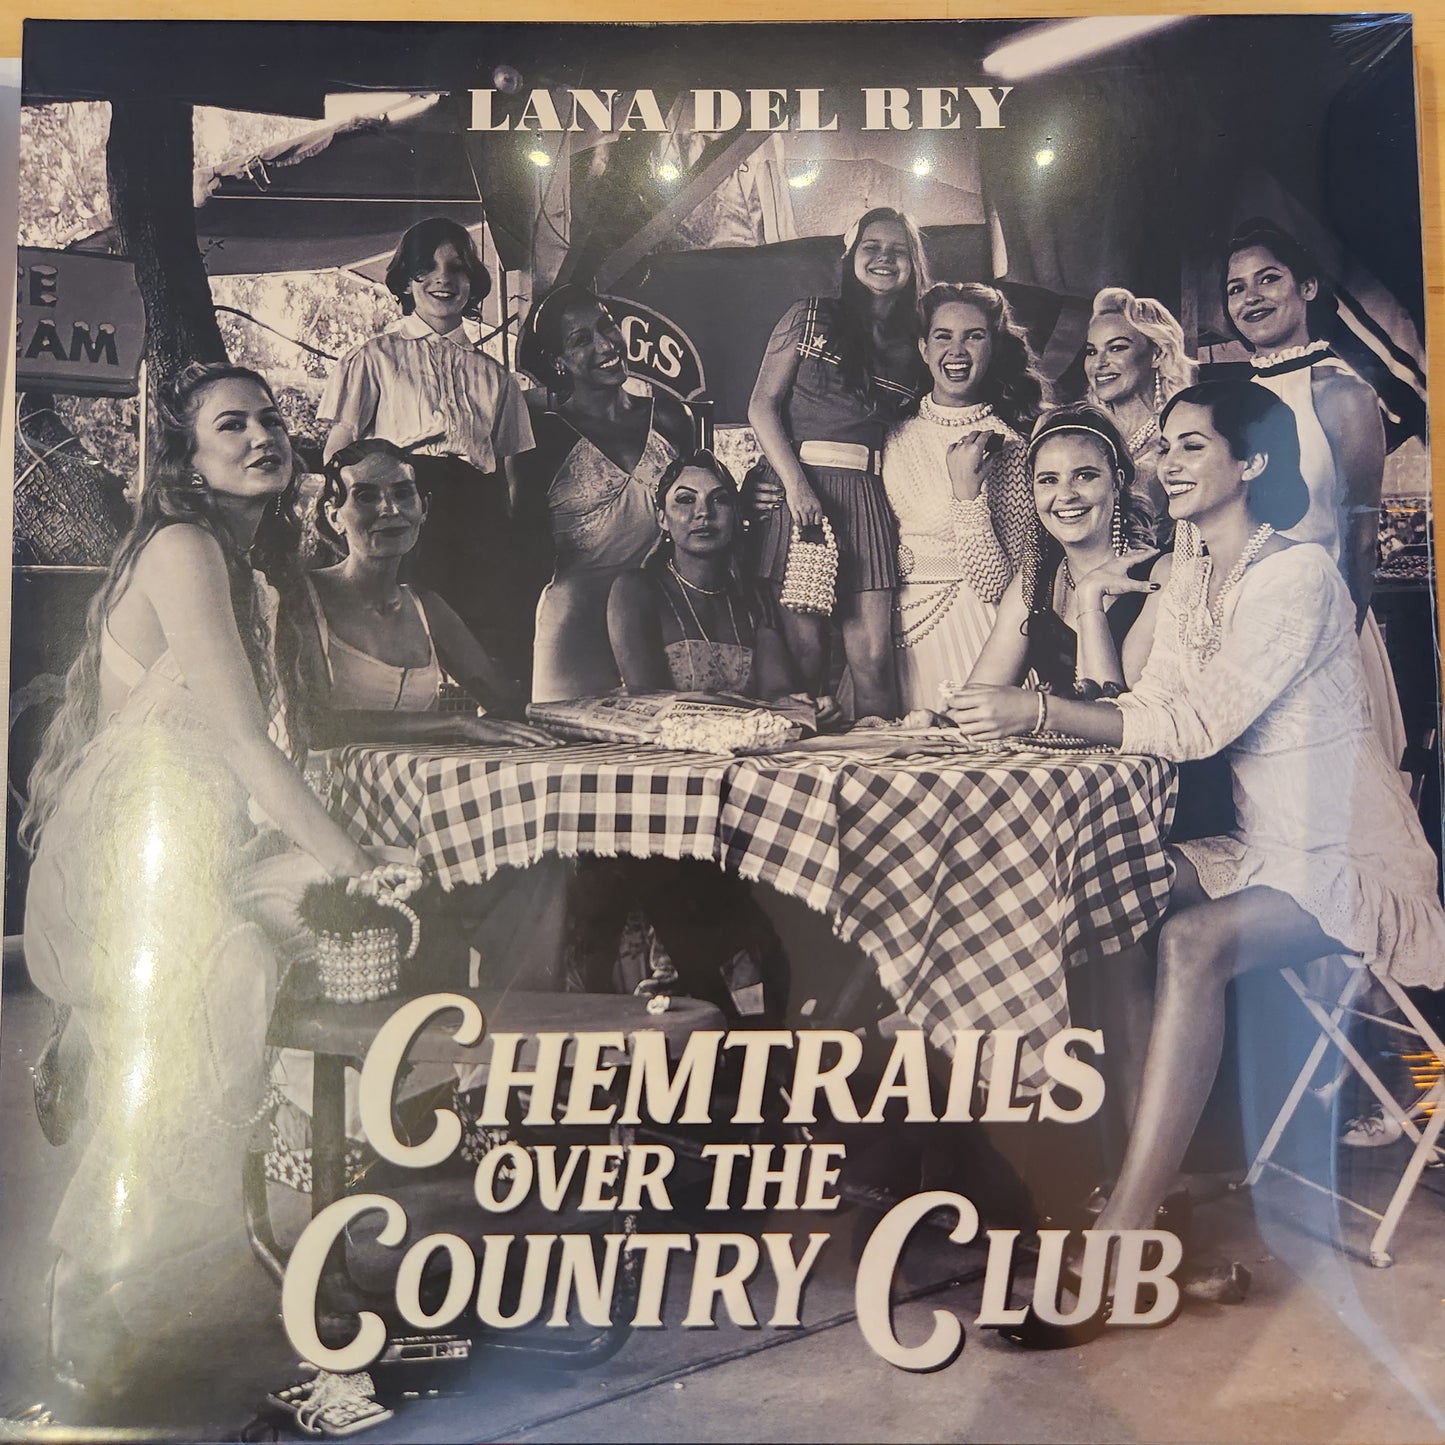 Lana Del Rey - Chemtrails over the Country Club - Vinyl LP